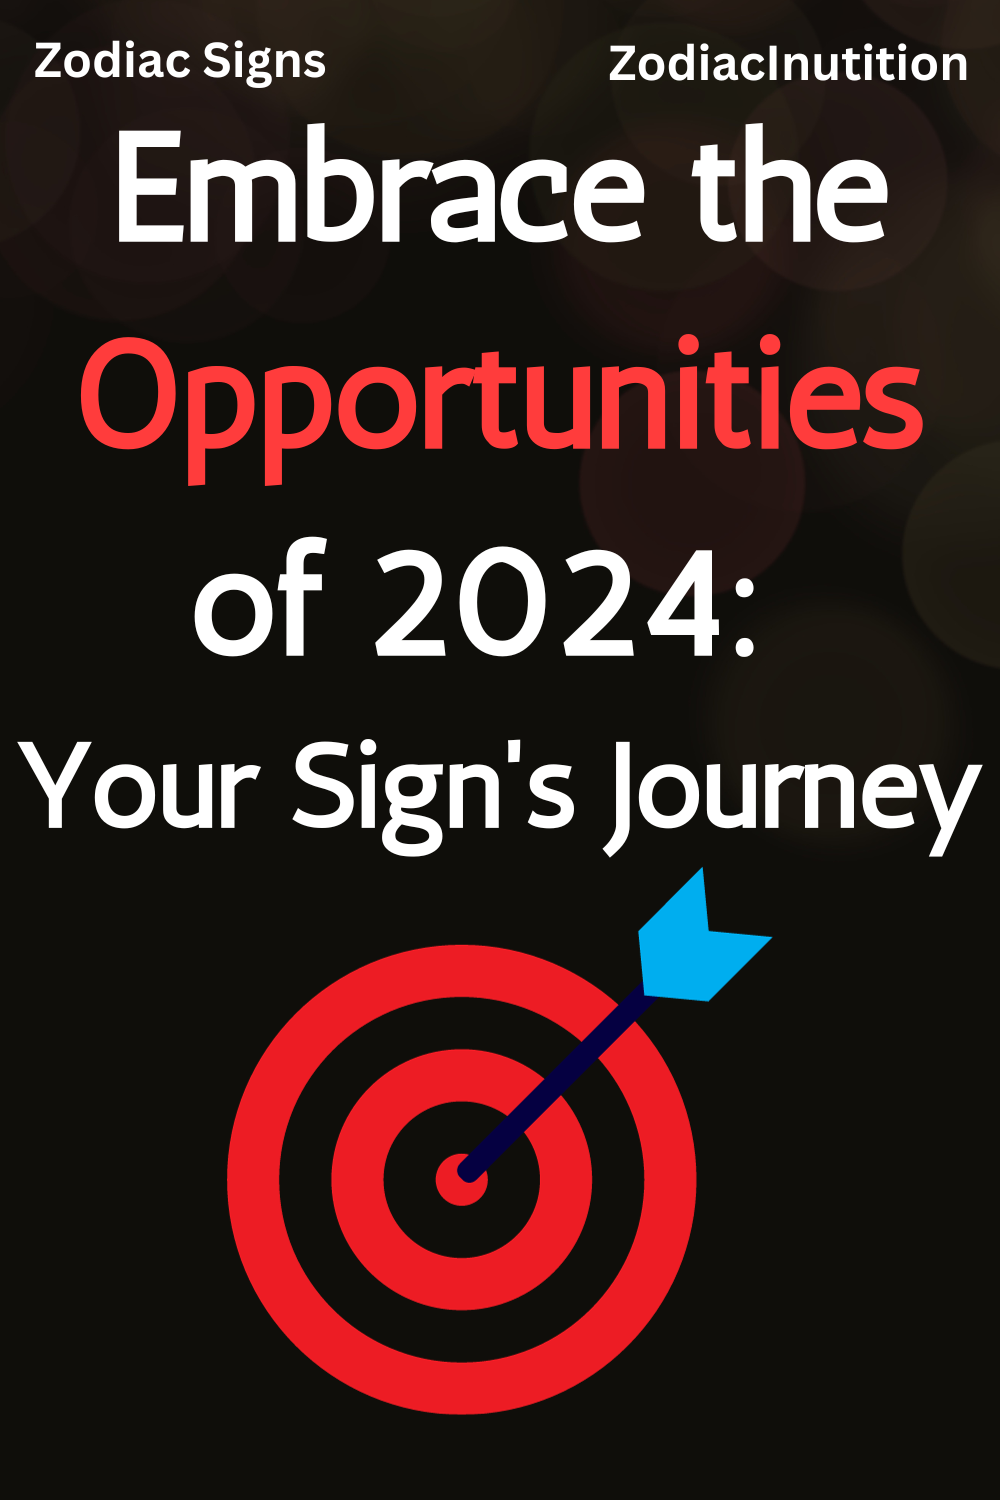 Embrace the Opportunities of 2024: Your Sign's Journey